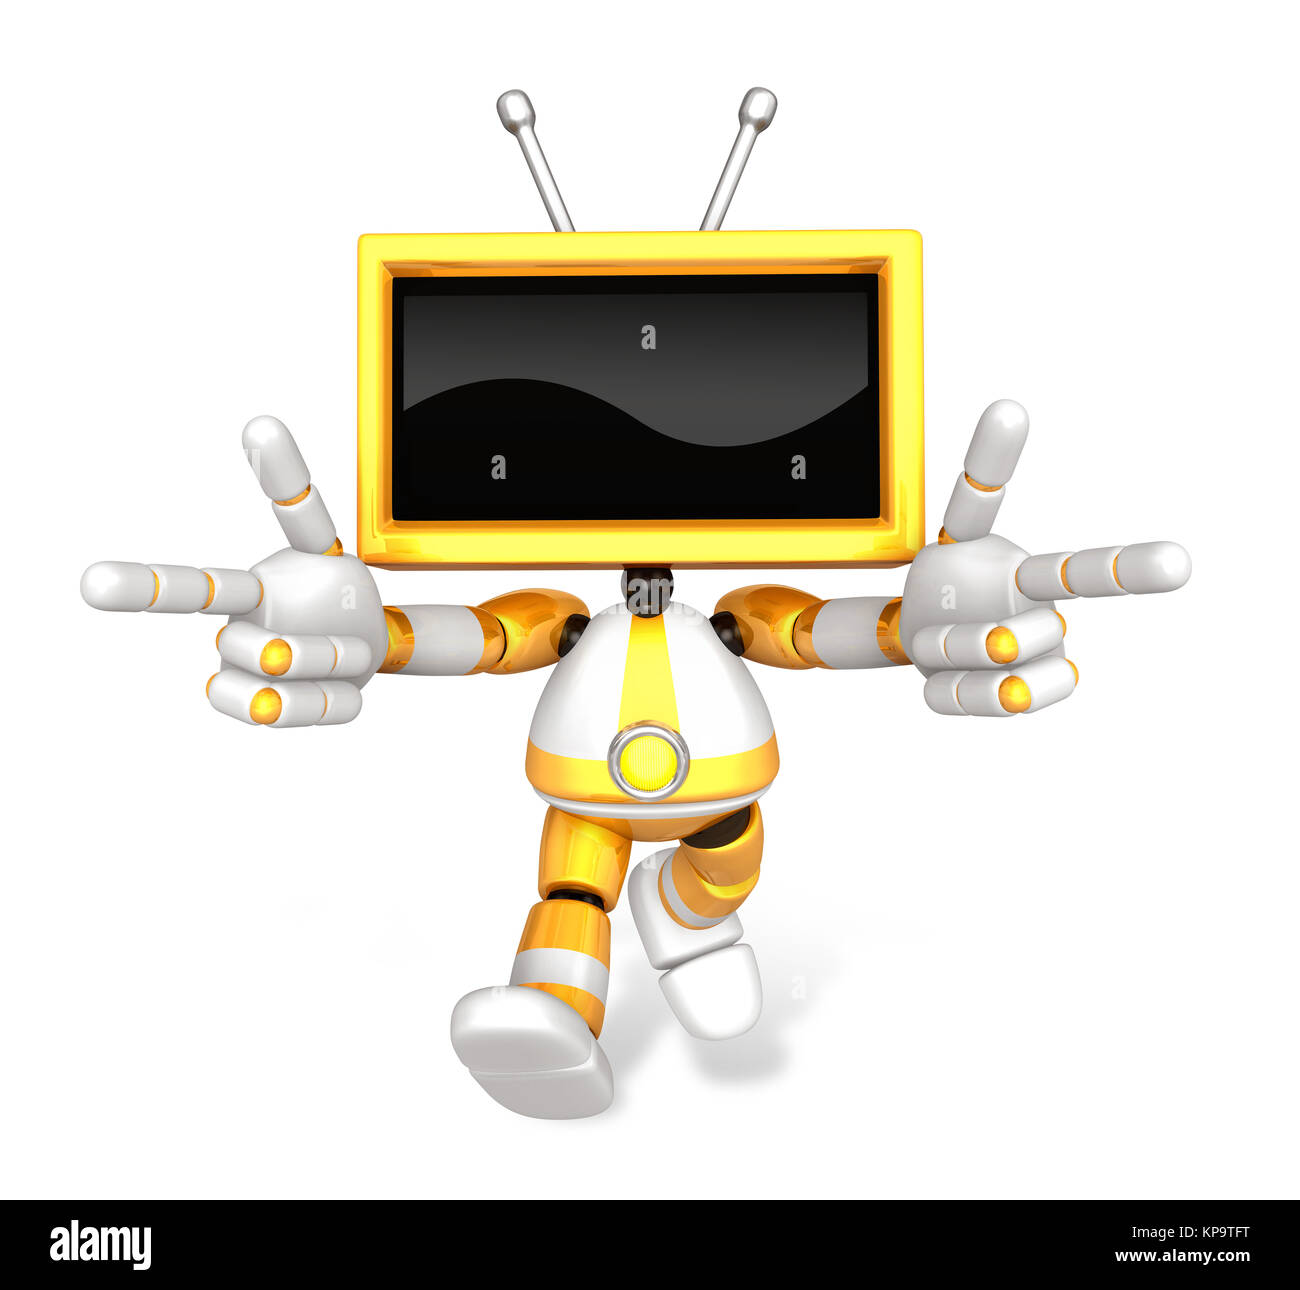 Yellow TV character are kindly guidance. Create 3D Television Robot Series. Stock Photo